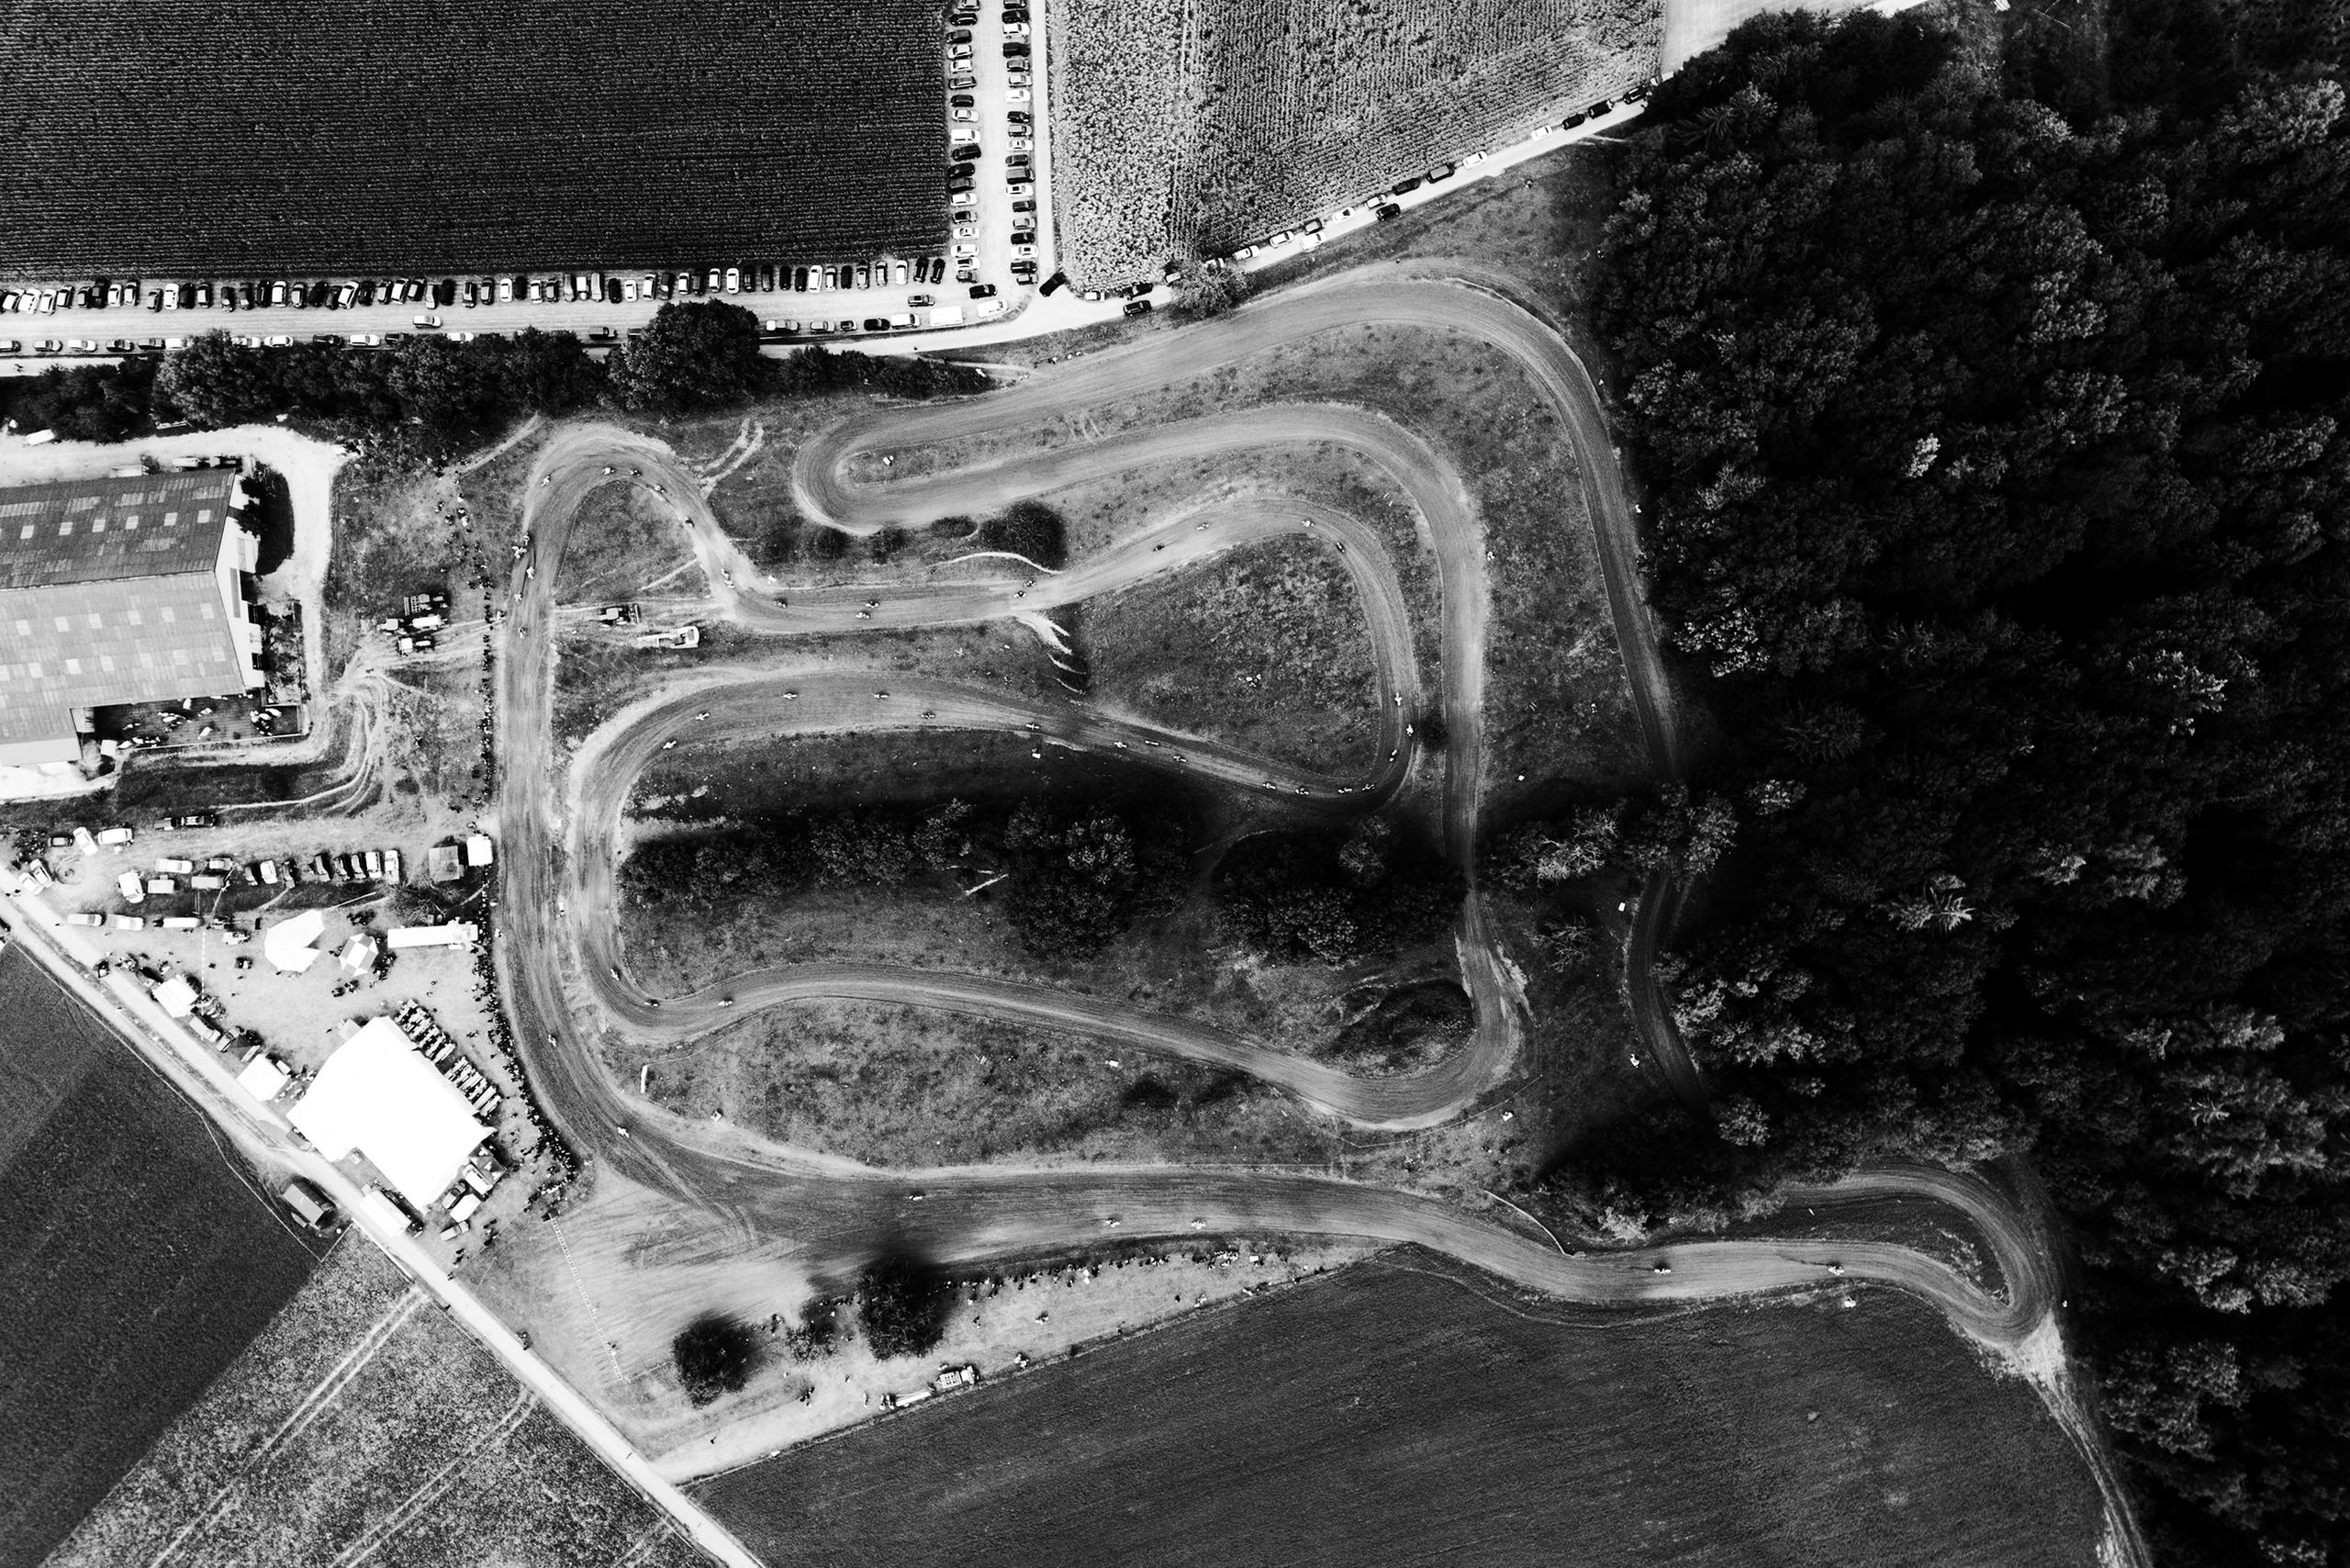 Aerial view of a motocross race site